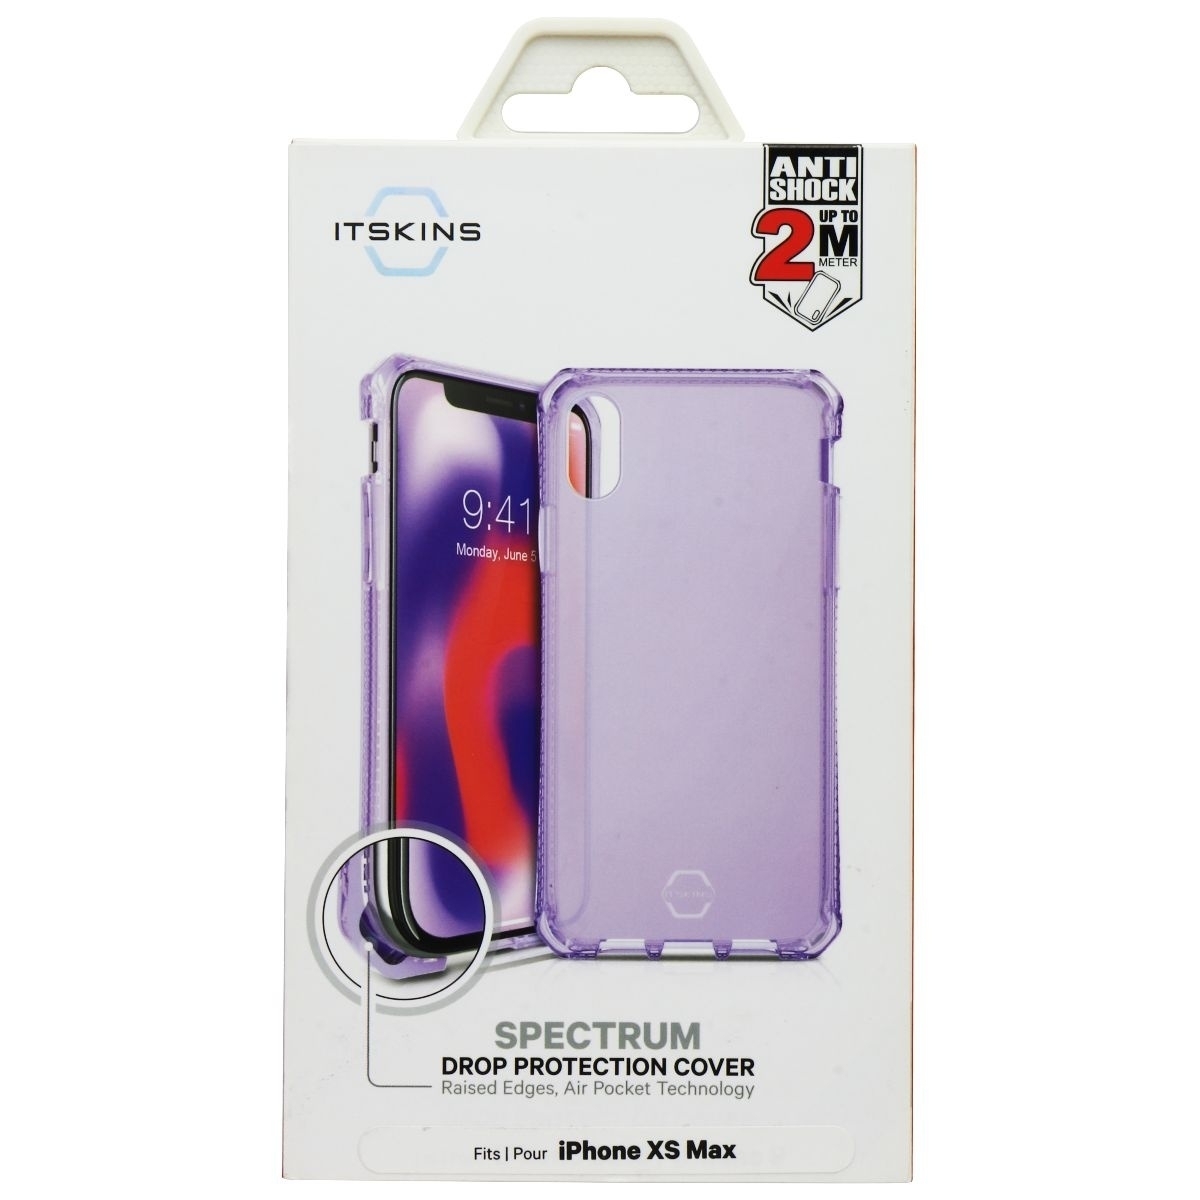 ITSKINS Spectrum Clear Phone Case For IPhone Xs Max - Light Purple